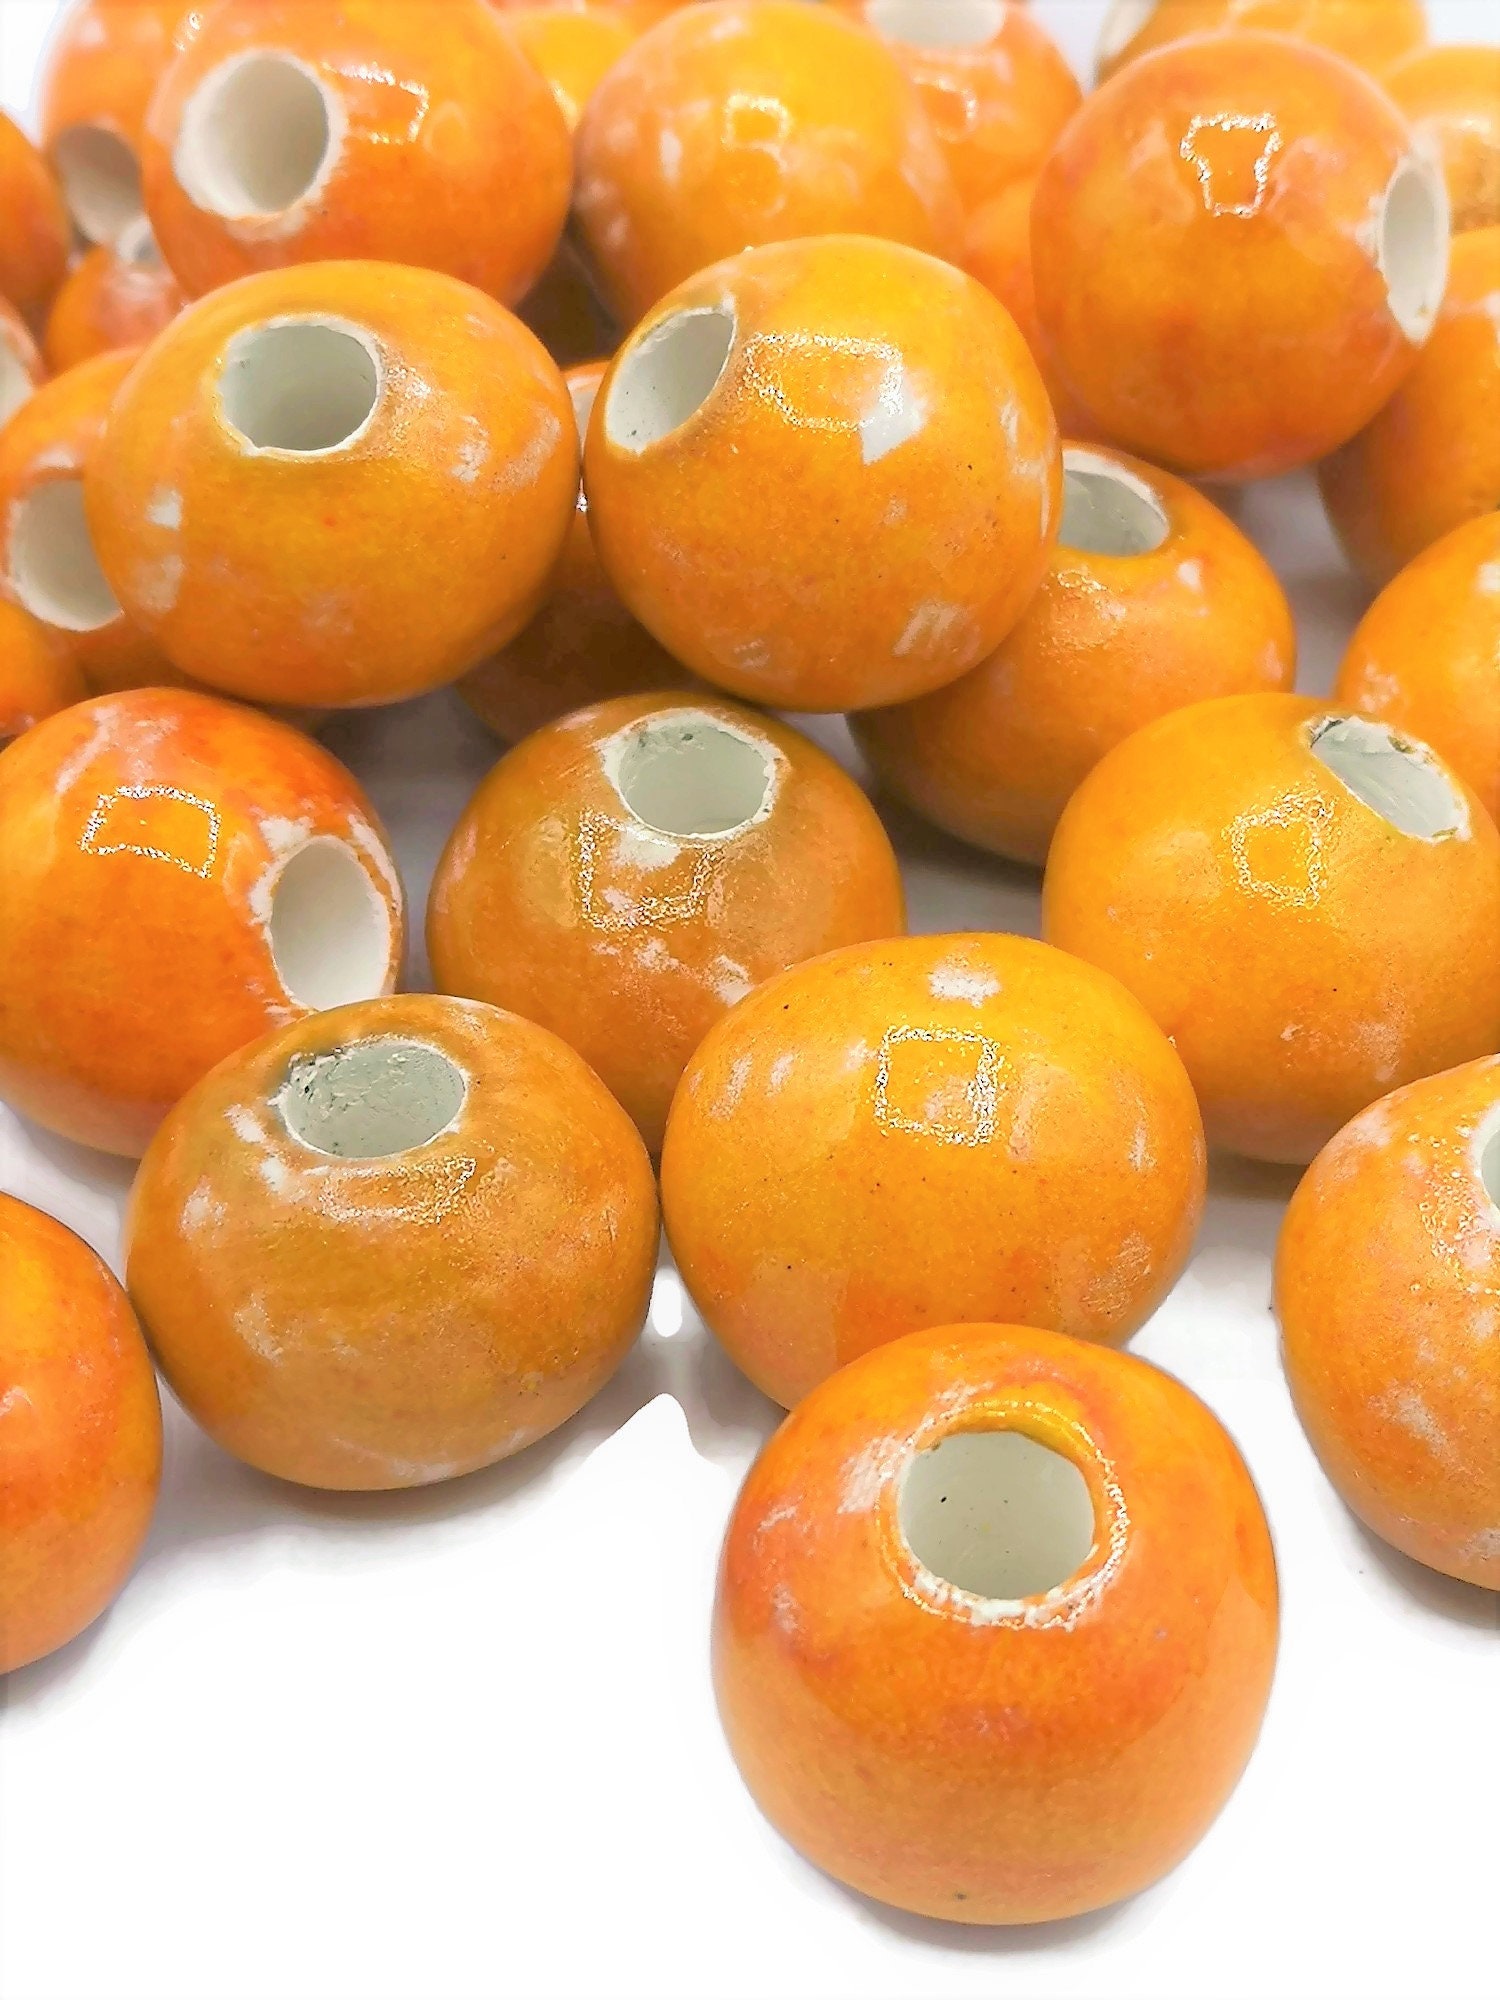 1pc 30mm Extra Large Beads for Jewelry Making, Handmade Ceramic Macrame Beads  Large Hole 7mm, Unique Giant Orange Beads for Plant Hanger 